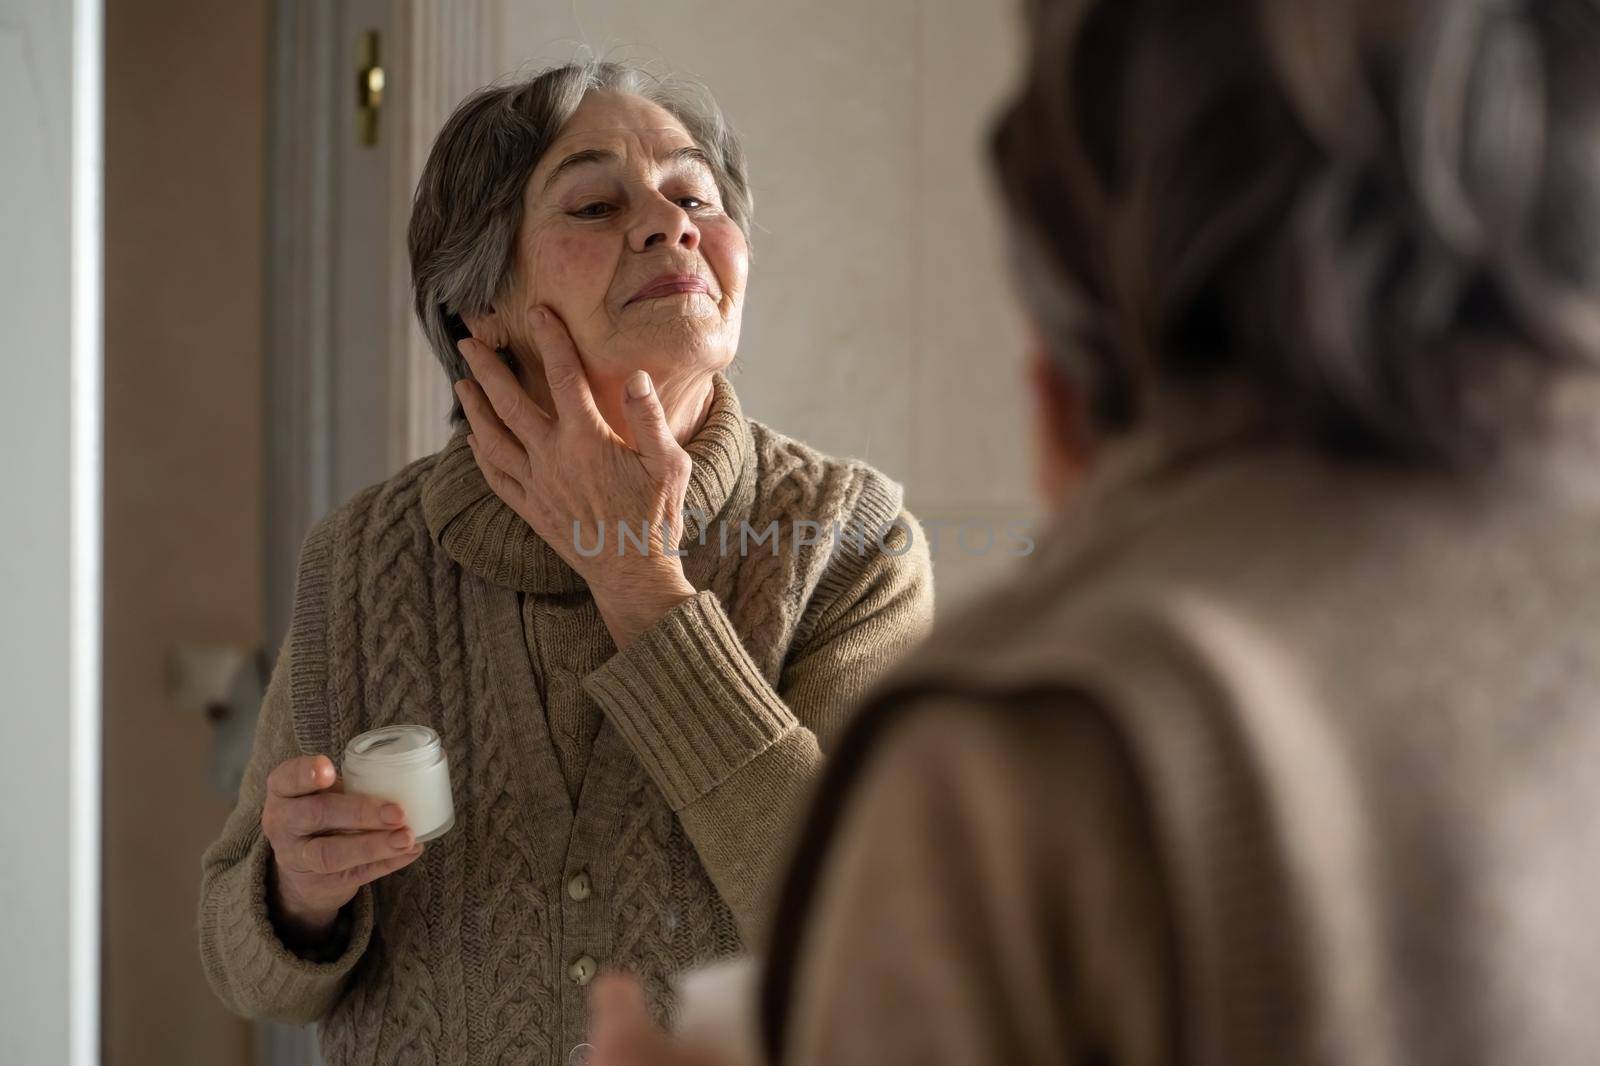 An elderly woman applies an anti-aging moisturizer. The pensioner looks after her appearance, makes cosmetic procedures in the bathroom. Uses cream for skin rejuvenation, regeneration, lifting.